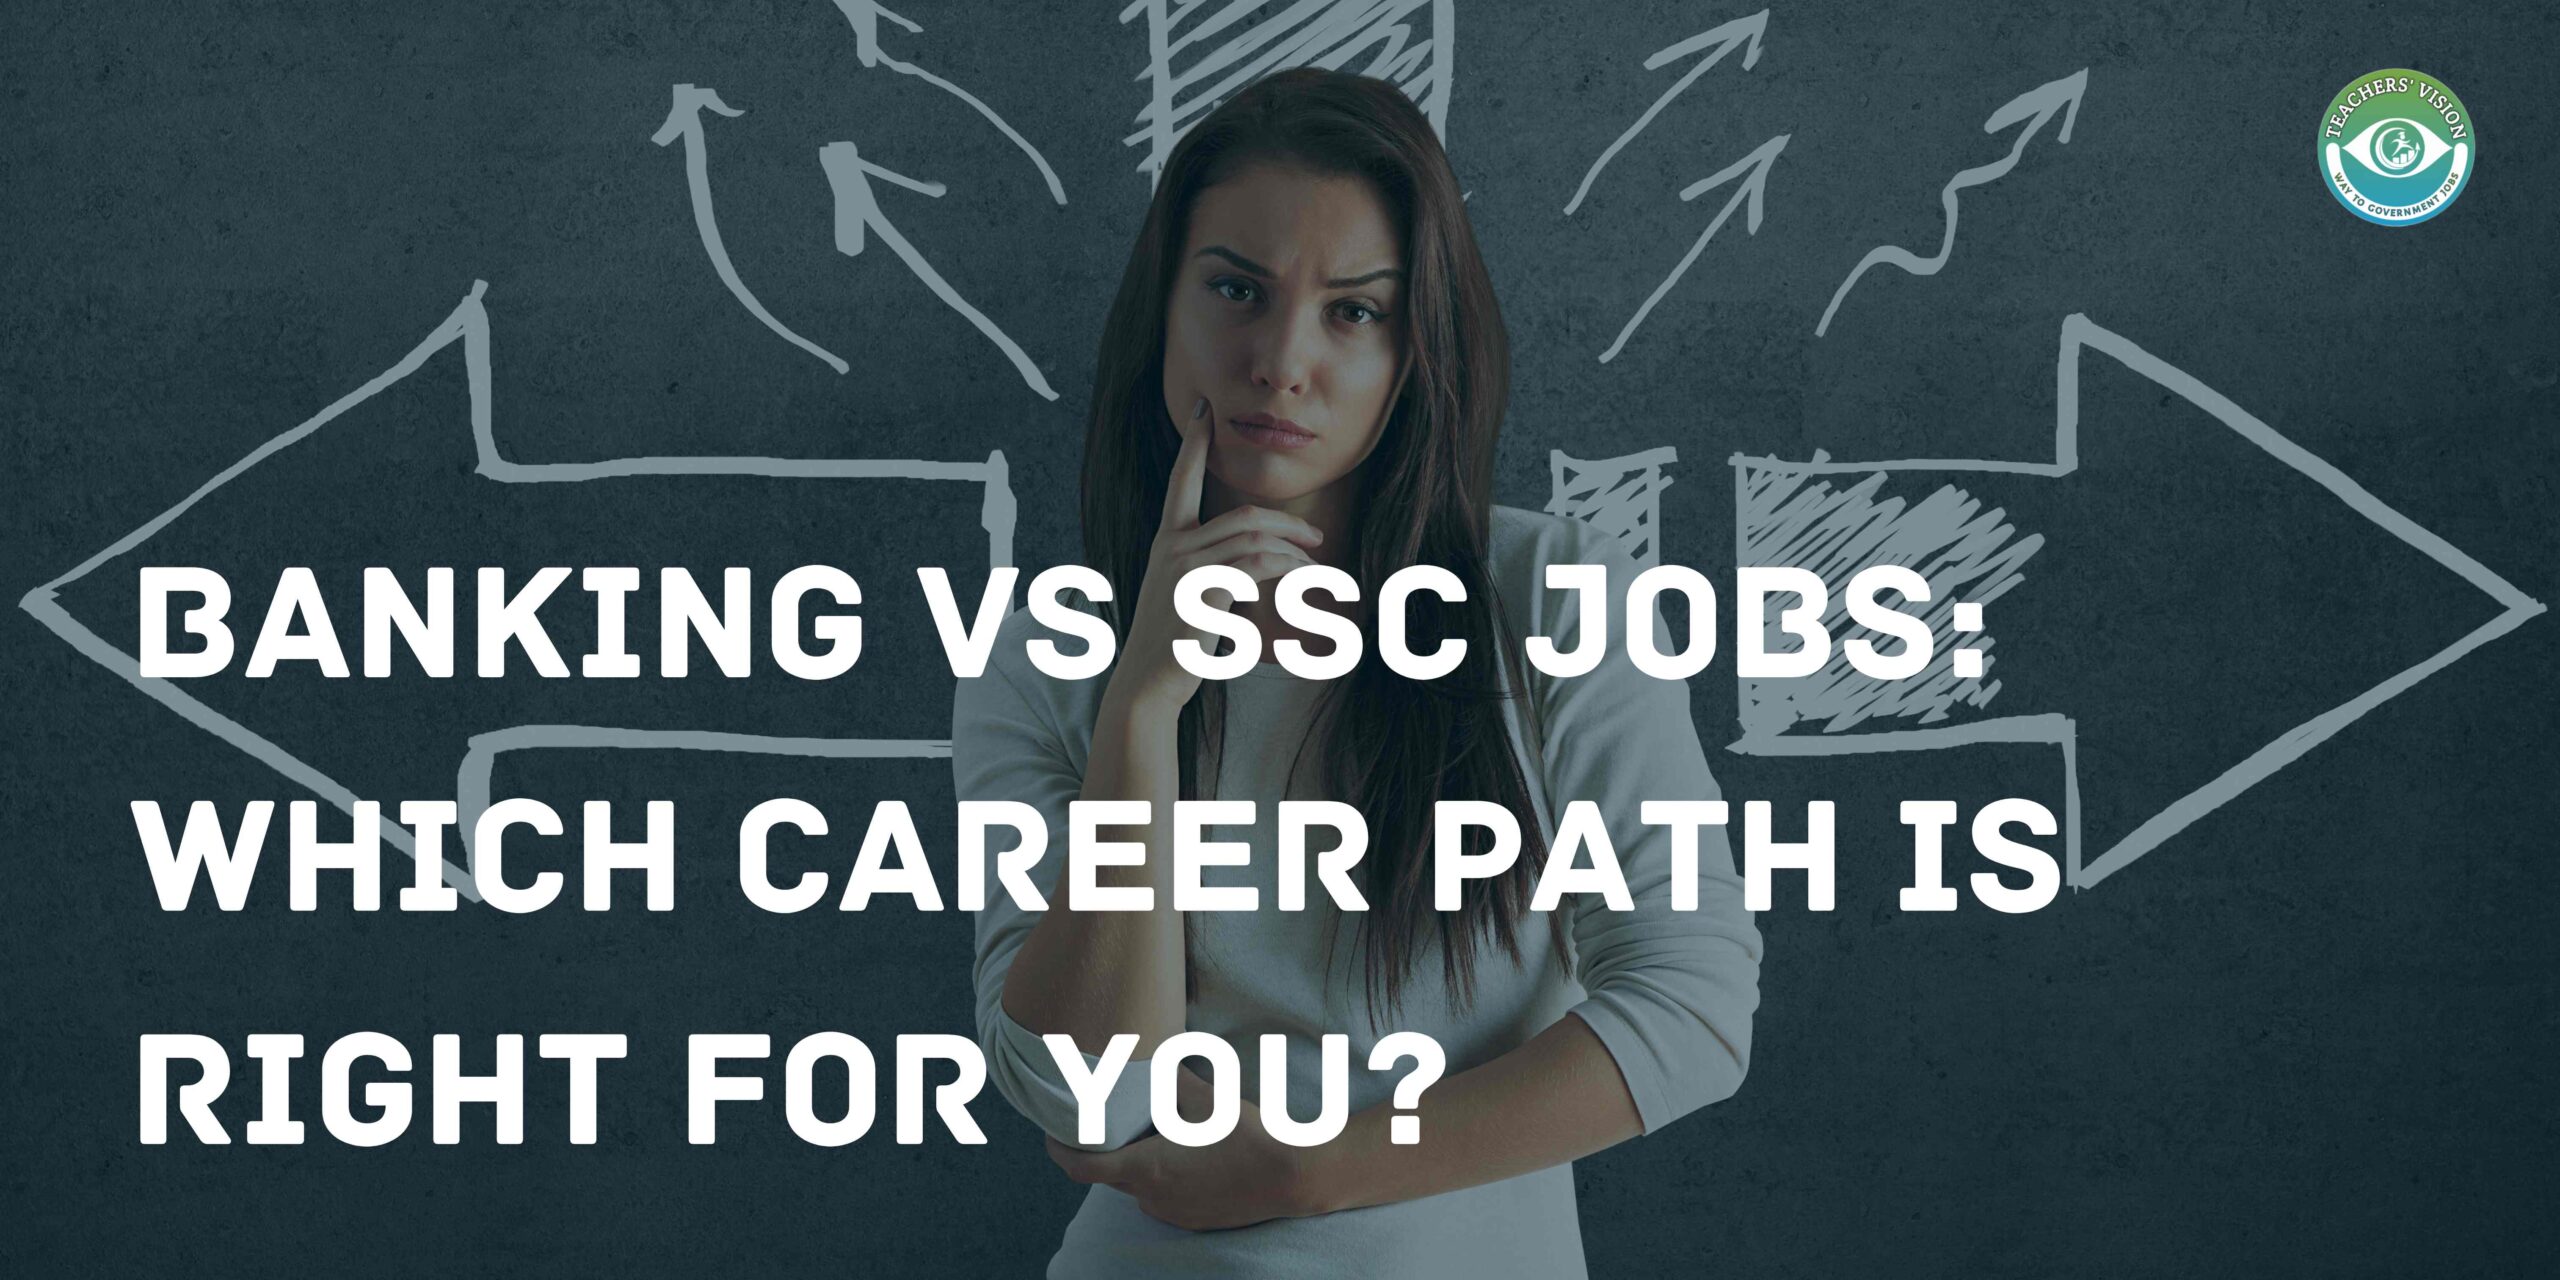 Banking vs SSC Jobs: Which Career Path is Right for You?